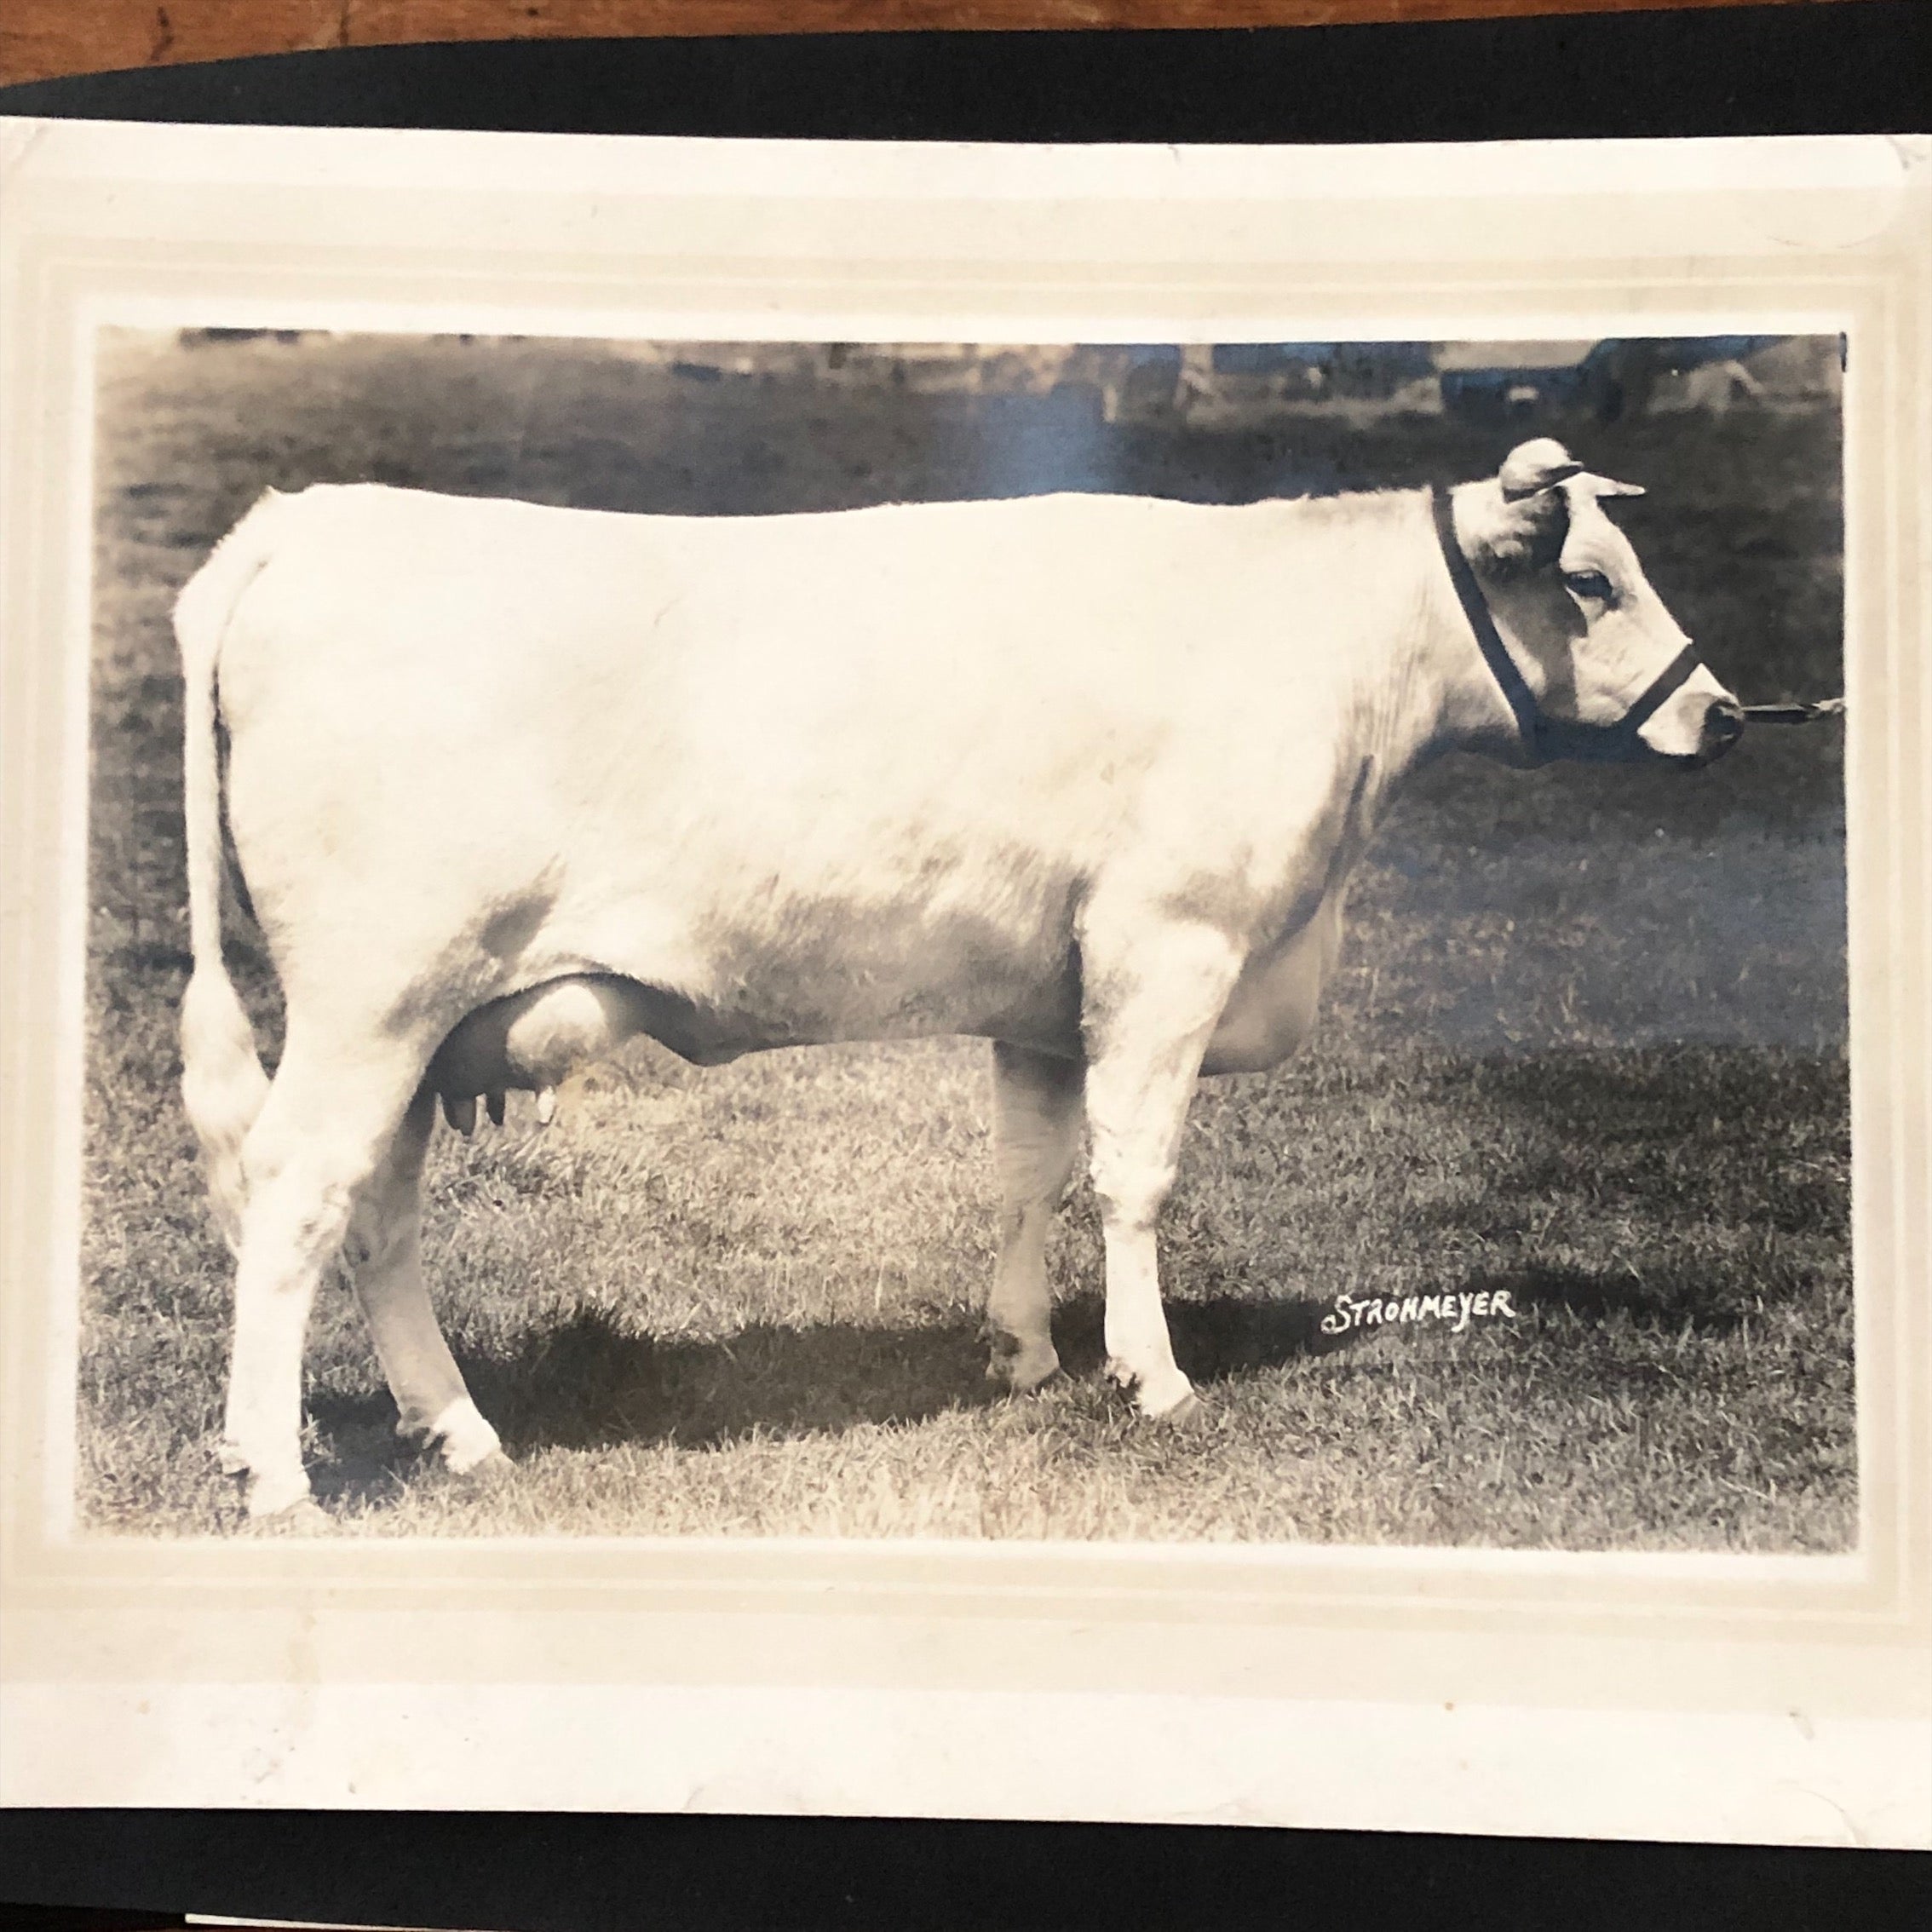 H.A. Strohmeyer Photograph of Cow